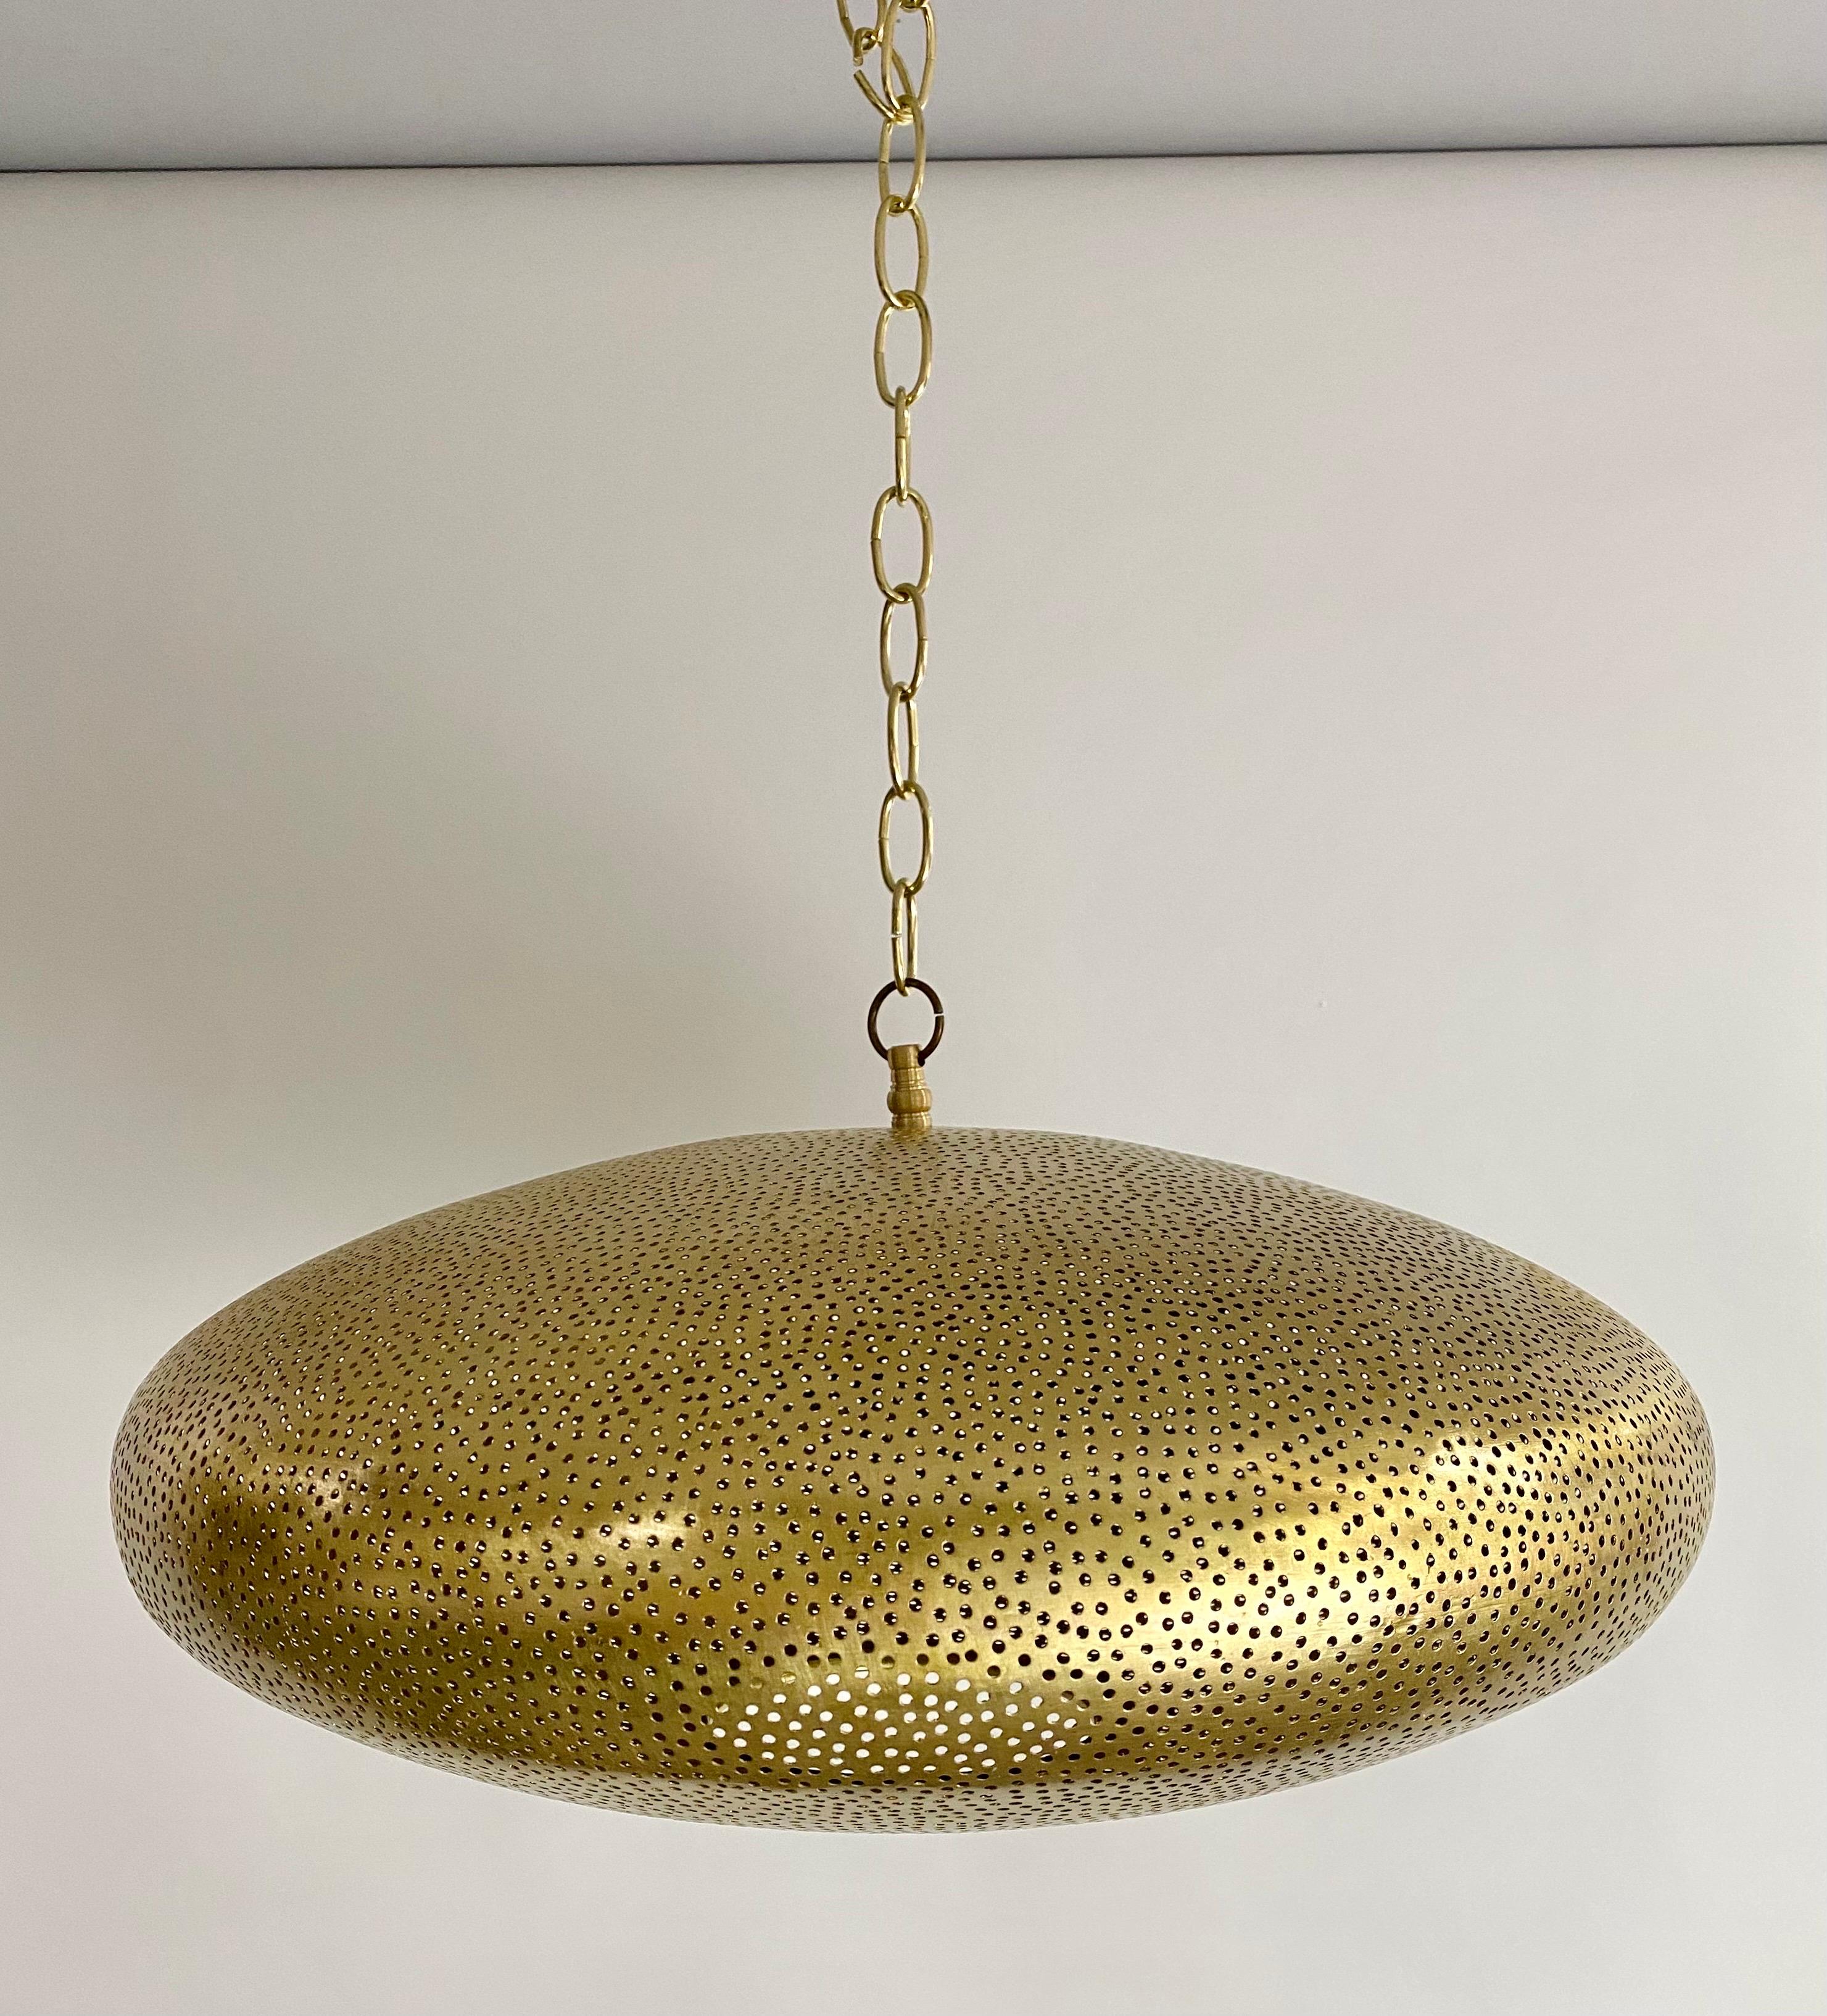 A Mid-Century Modern style all brass pendant or lantern. Featuring a spaceship oval shape, this stylish pendant is handmade of high quality brass and finely hand-tooled producing a soft ambient lighting perfect to elevate the mood and complement